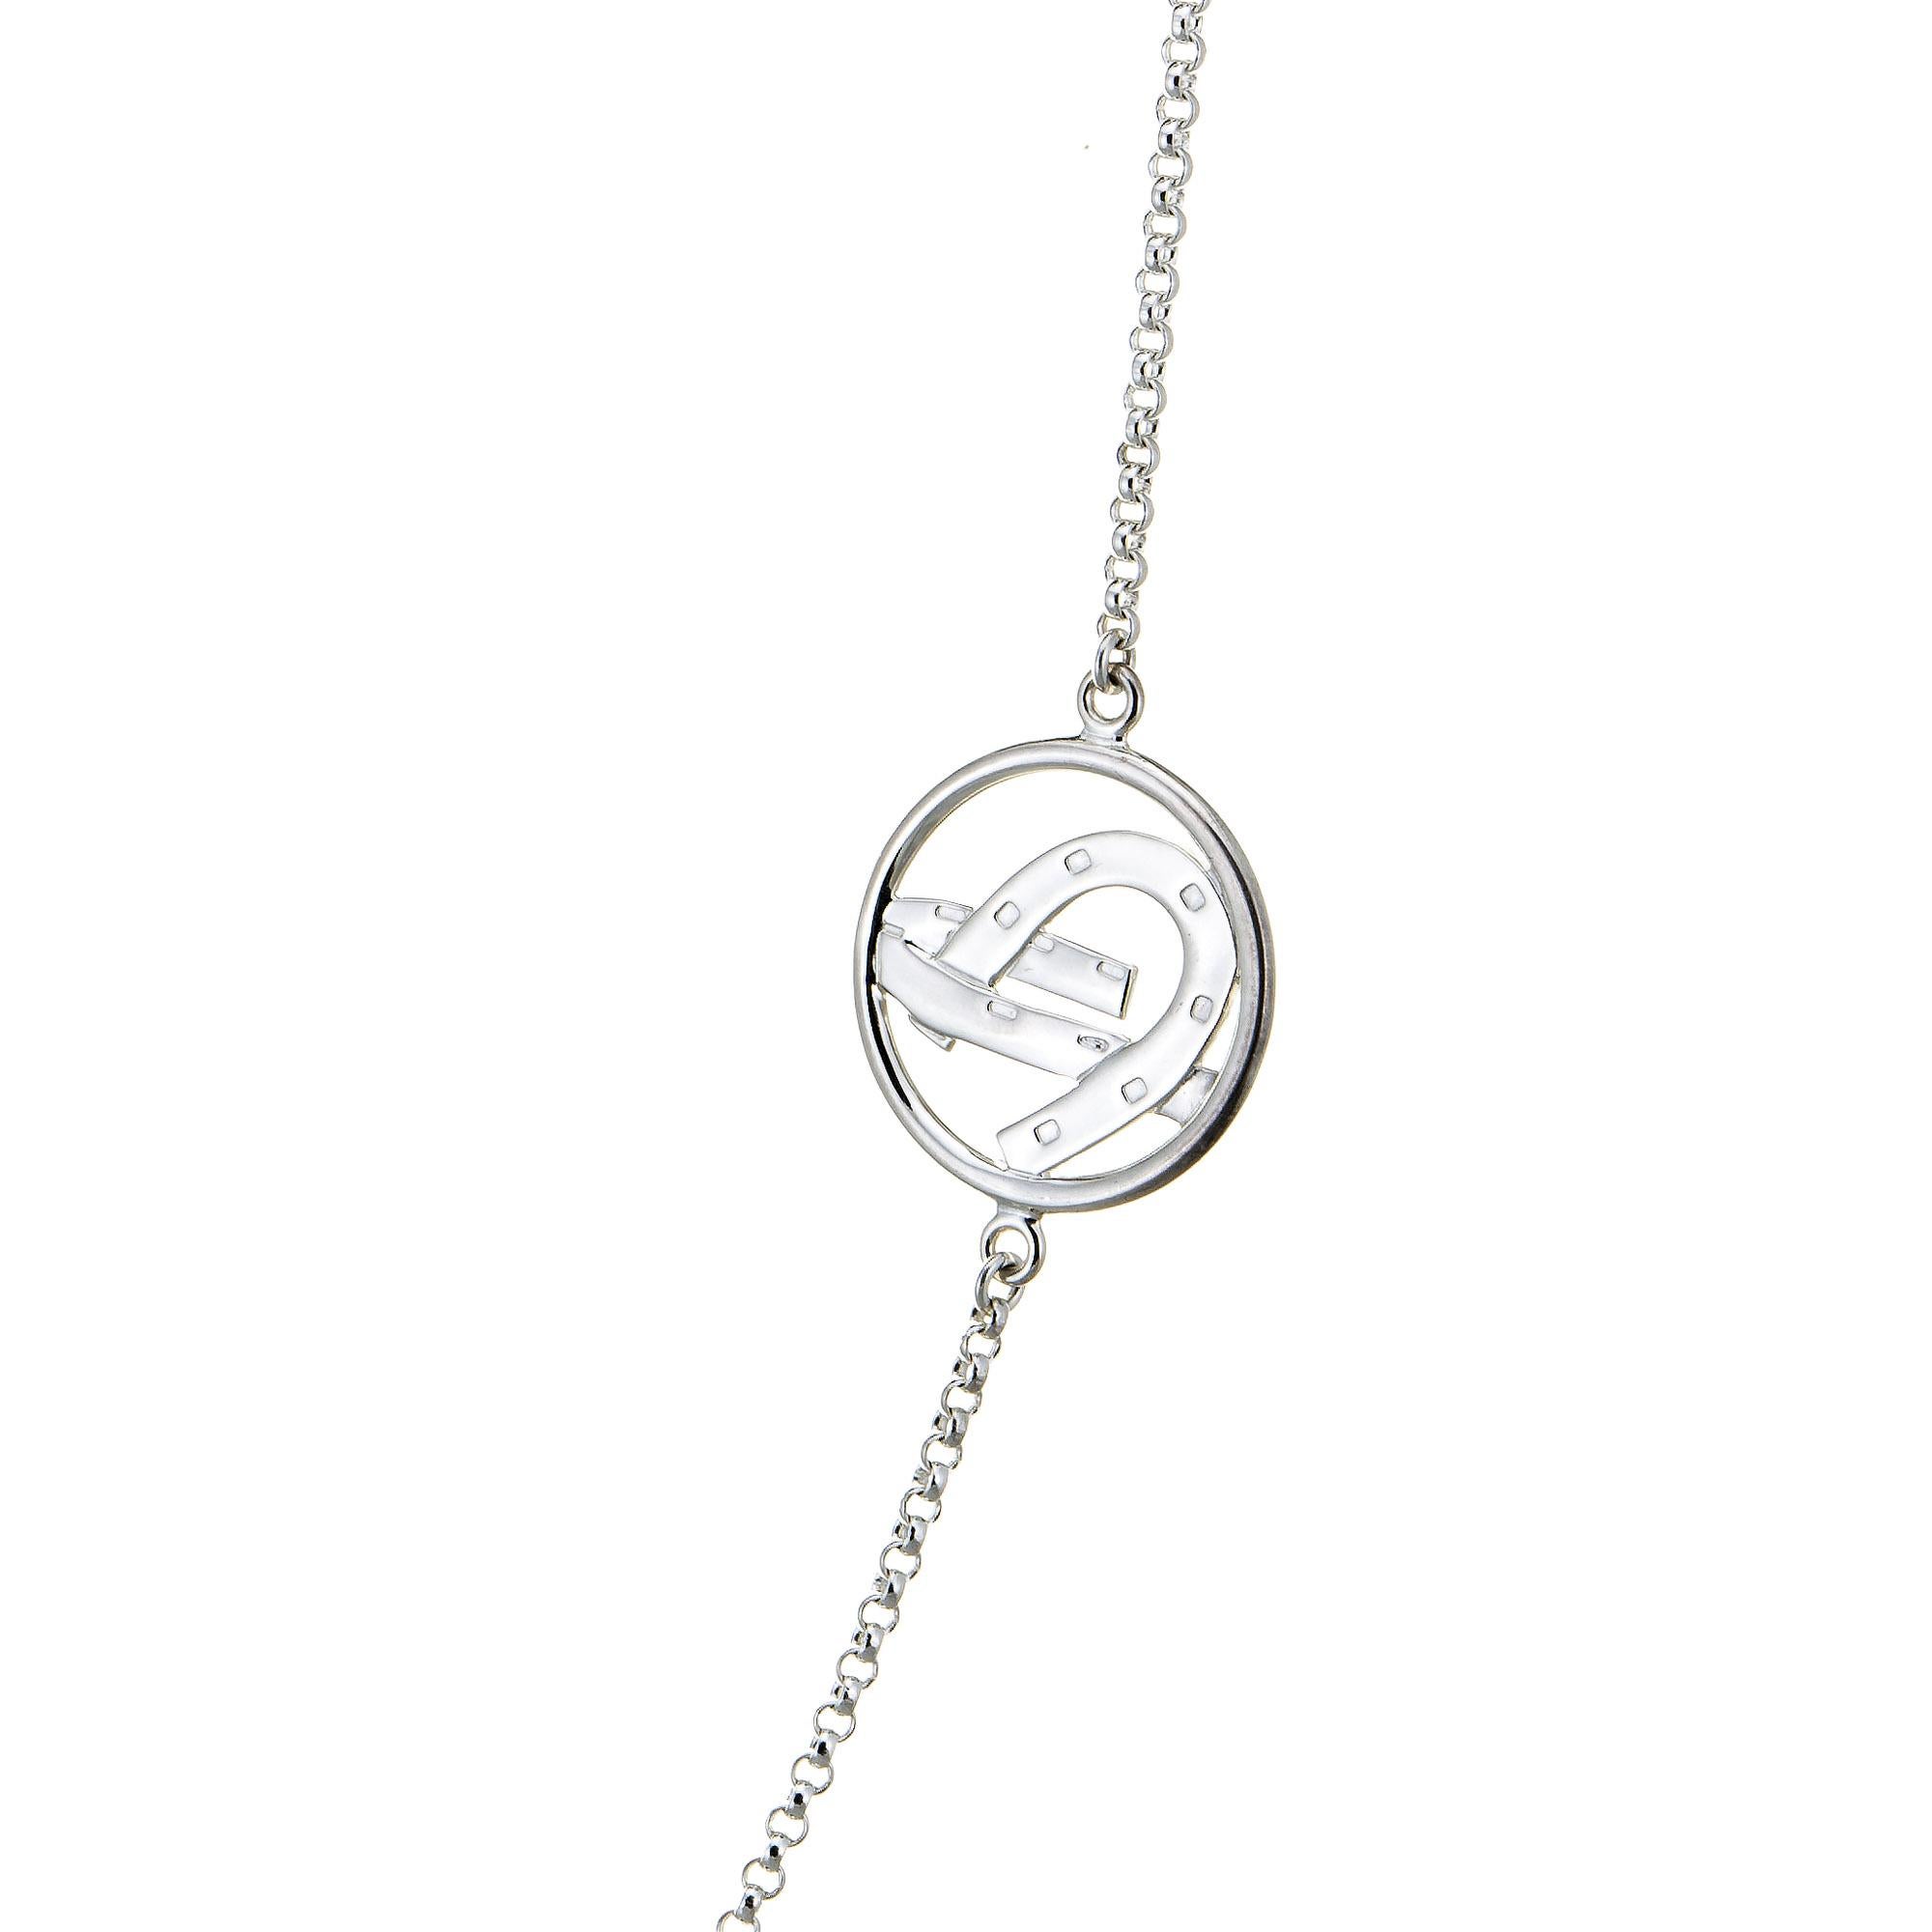 Stylish and finely detailed pre-owned Hermes equestrian necklace, crafted in 925 sterling silver.  

The long 35